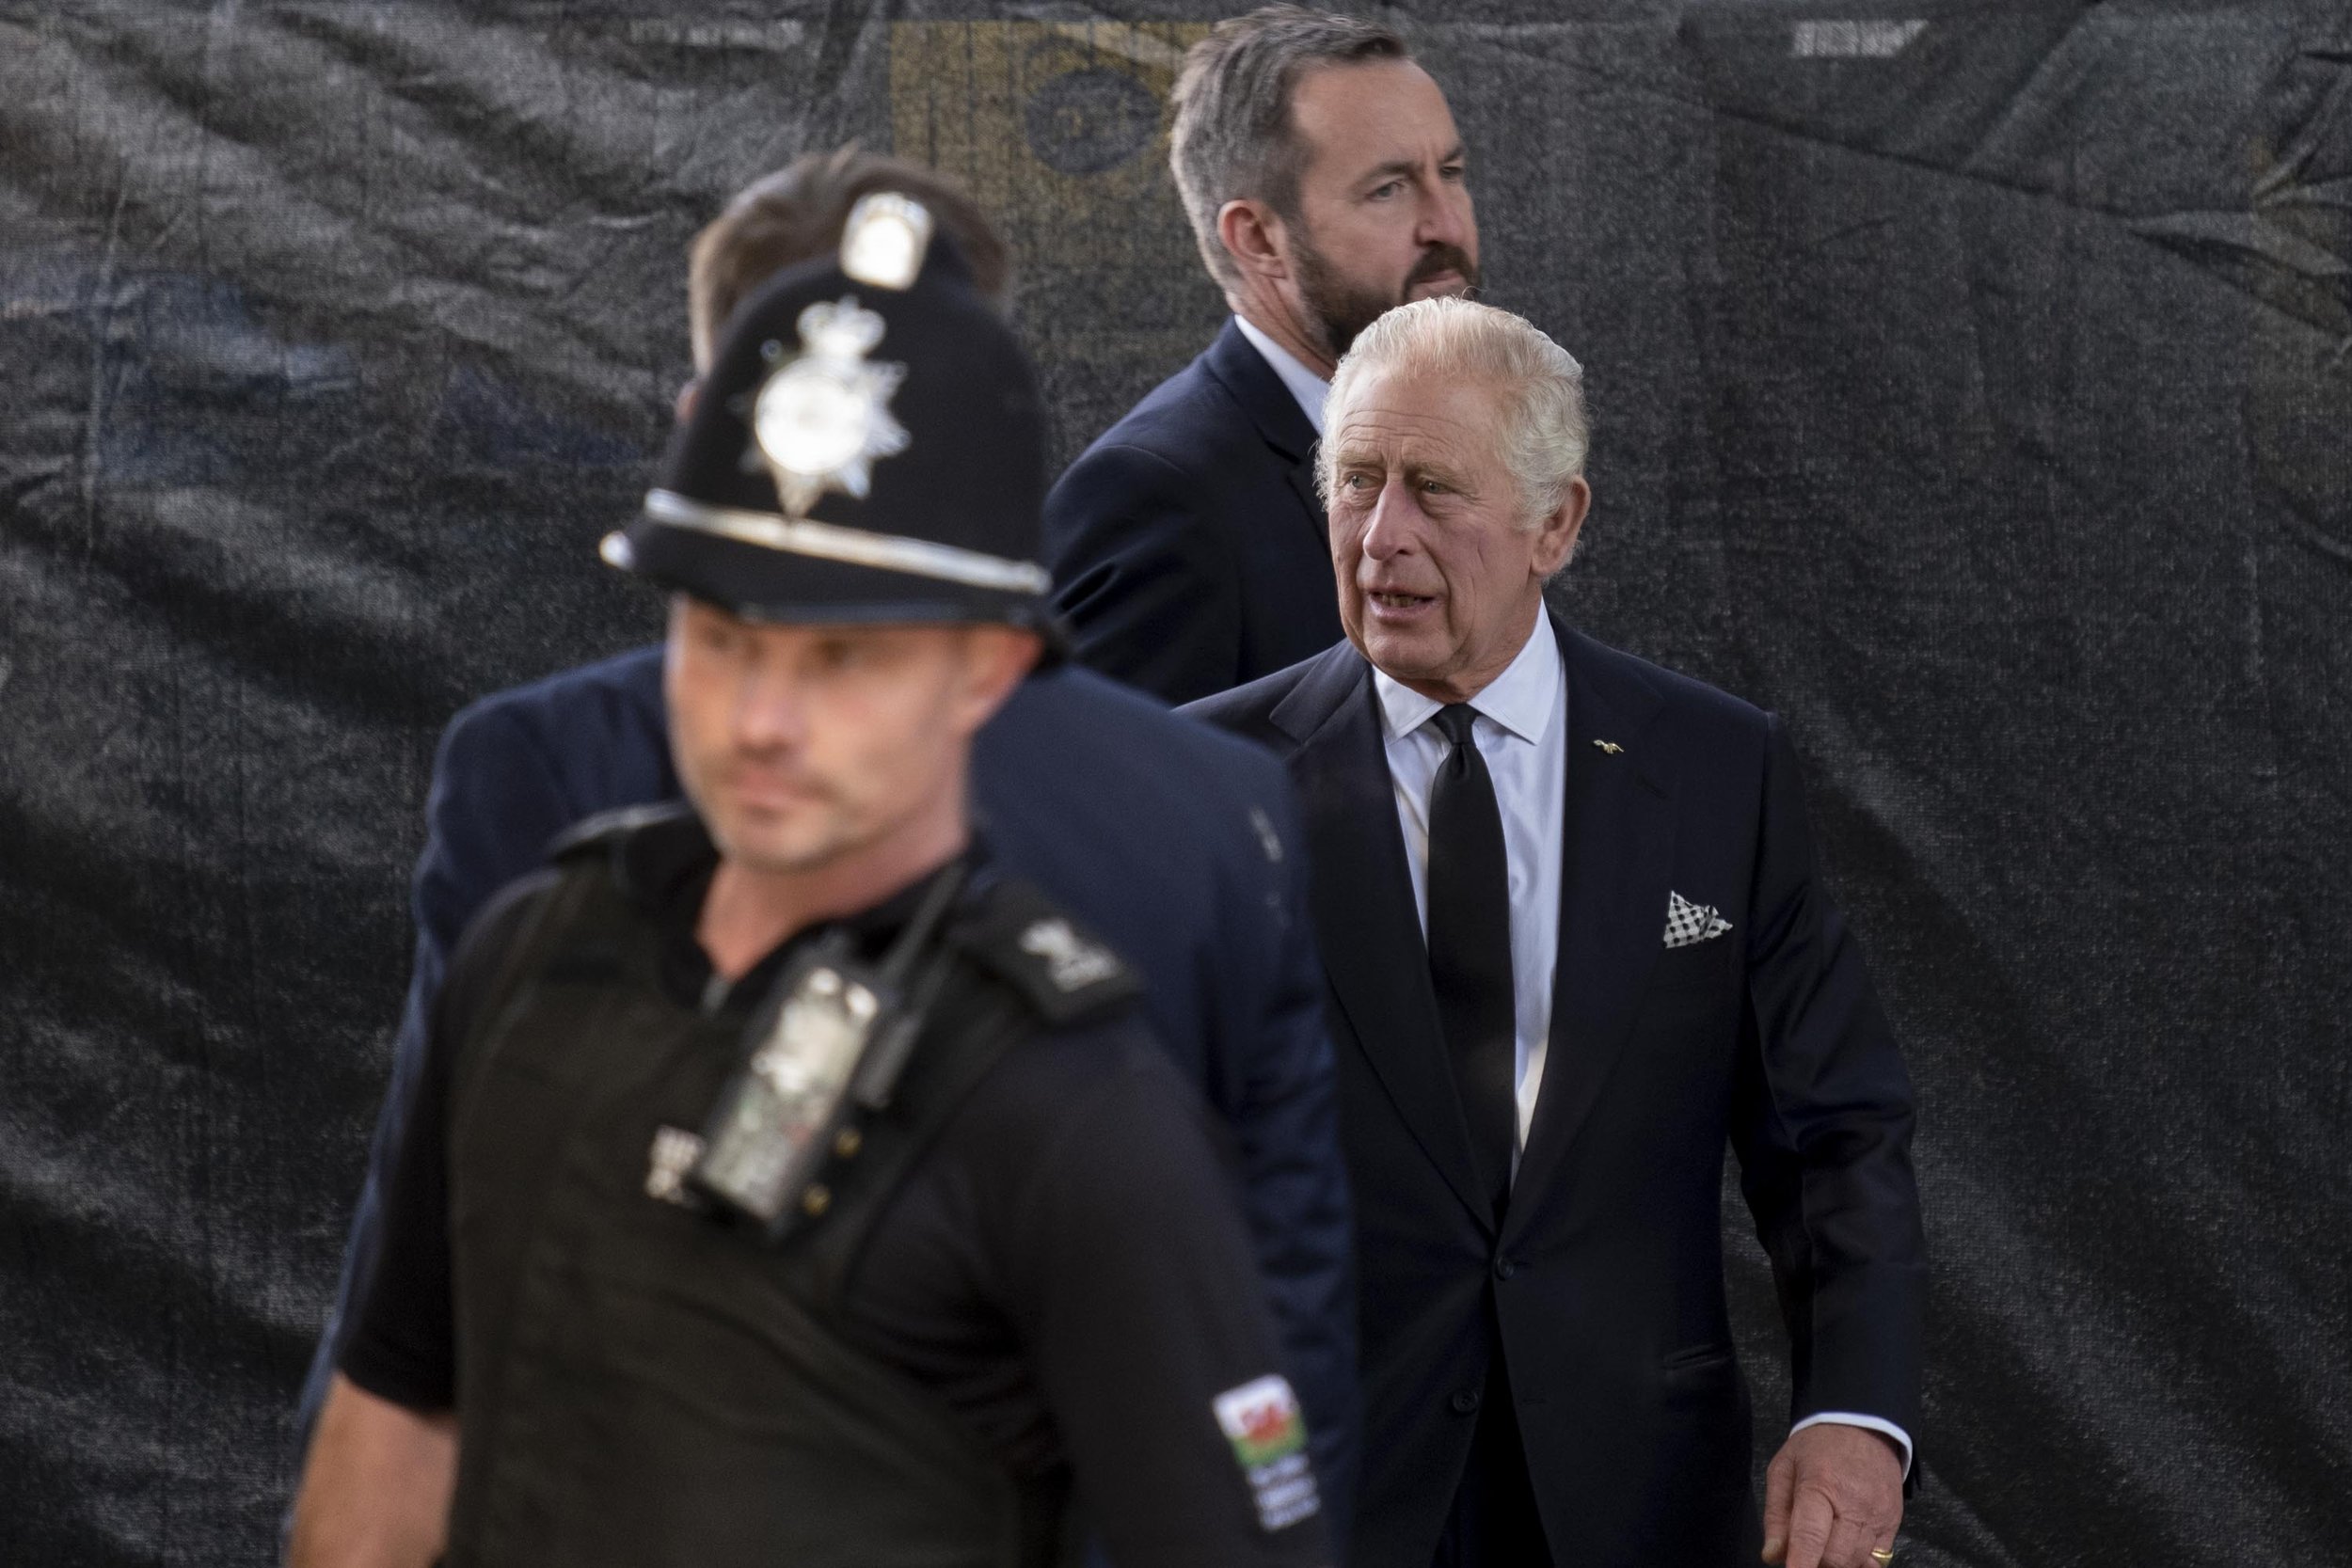  King Charles III leaves an impromptu visit to see people queuing up to see the Queen lying in state. 